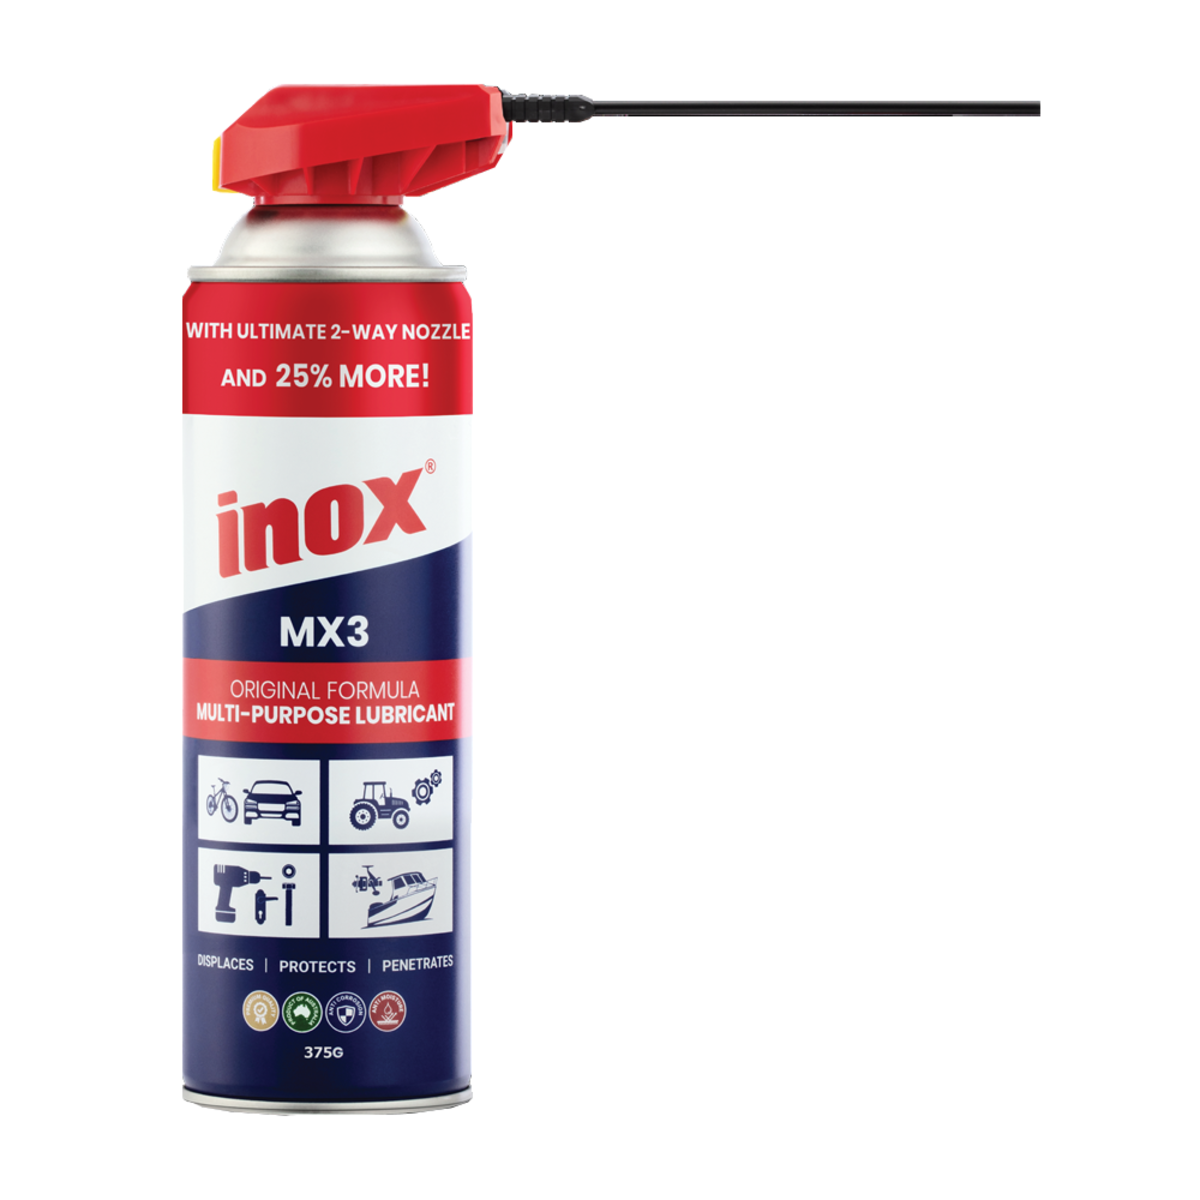 Inox 300G Spray Can — Spot On Fishing Tackle